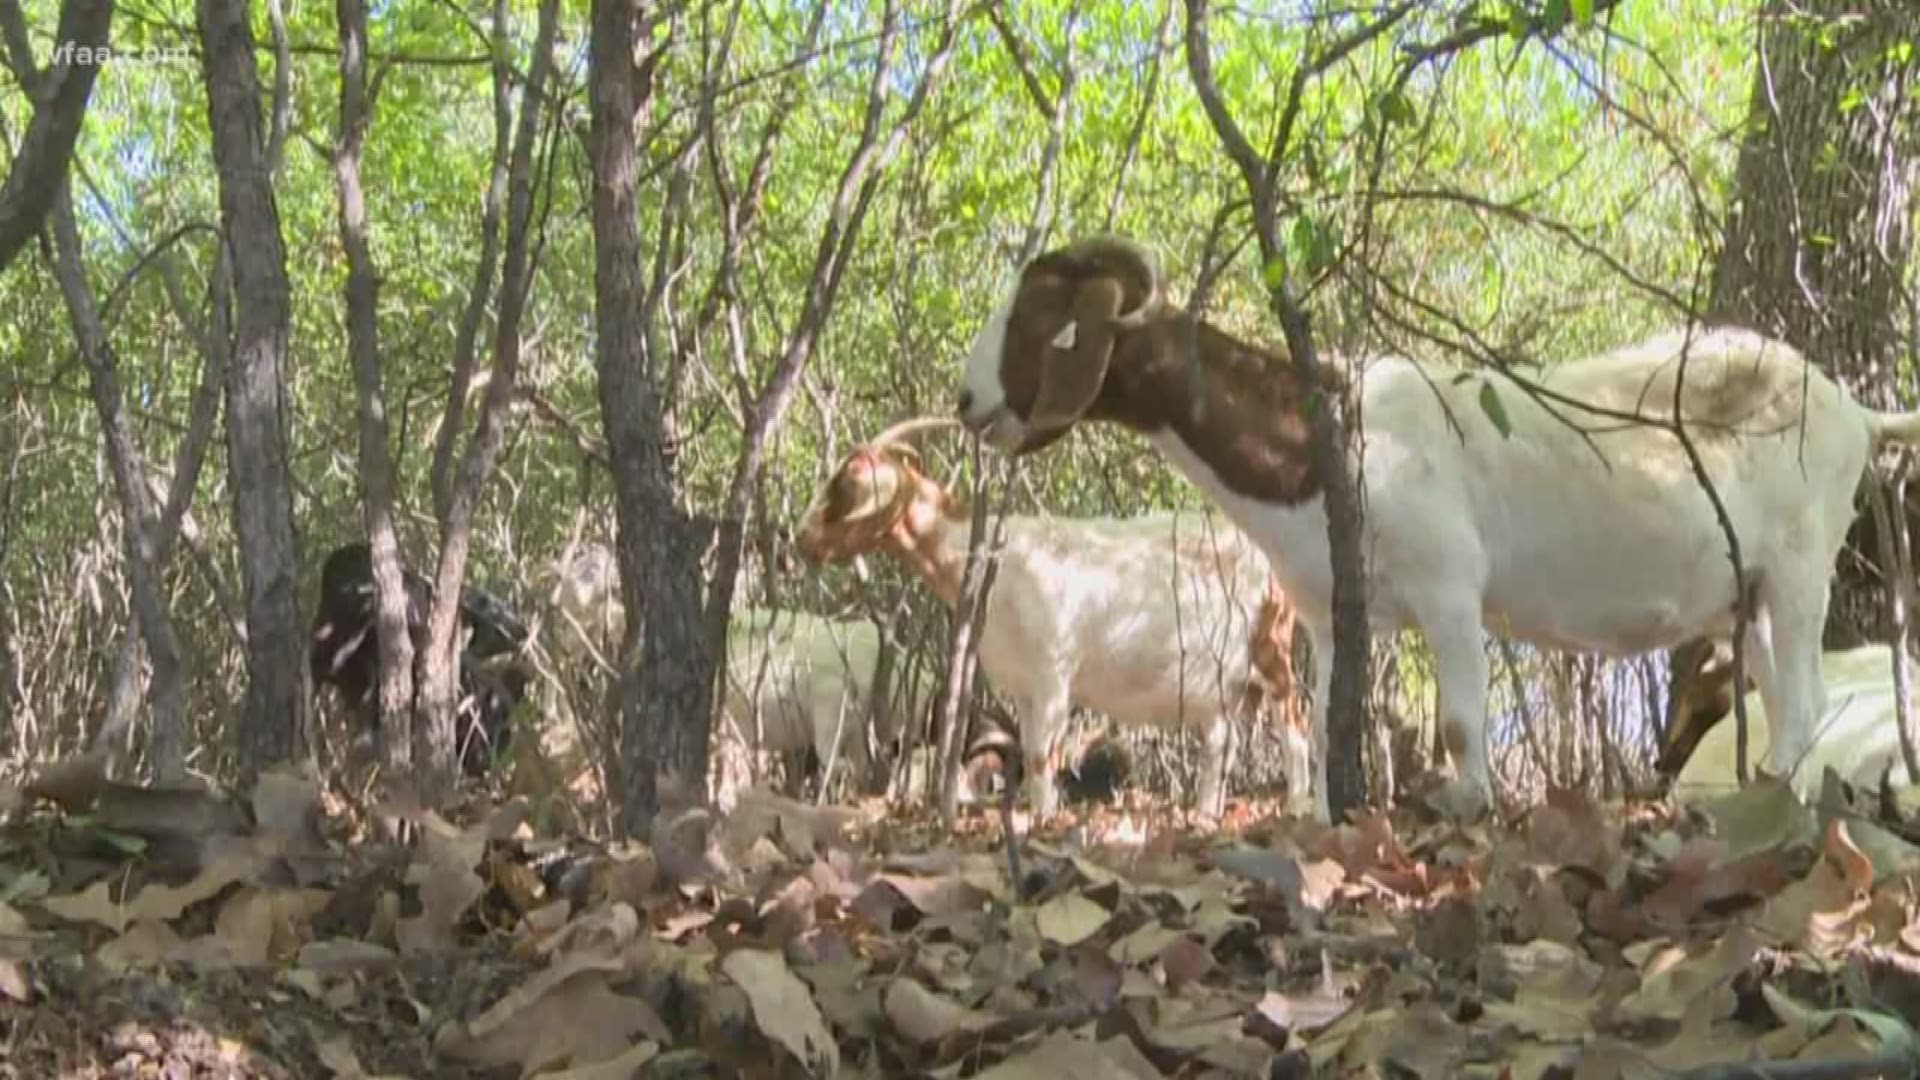 Meet the goats who are saving the trees in Denton and the donkeys who are protecting them.